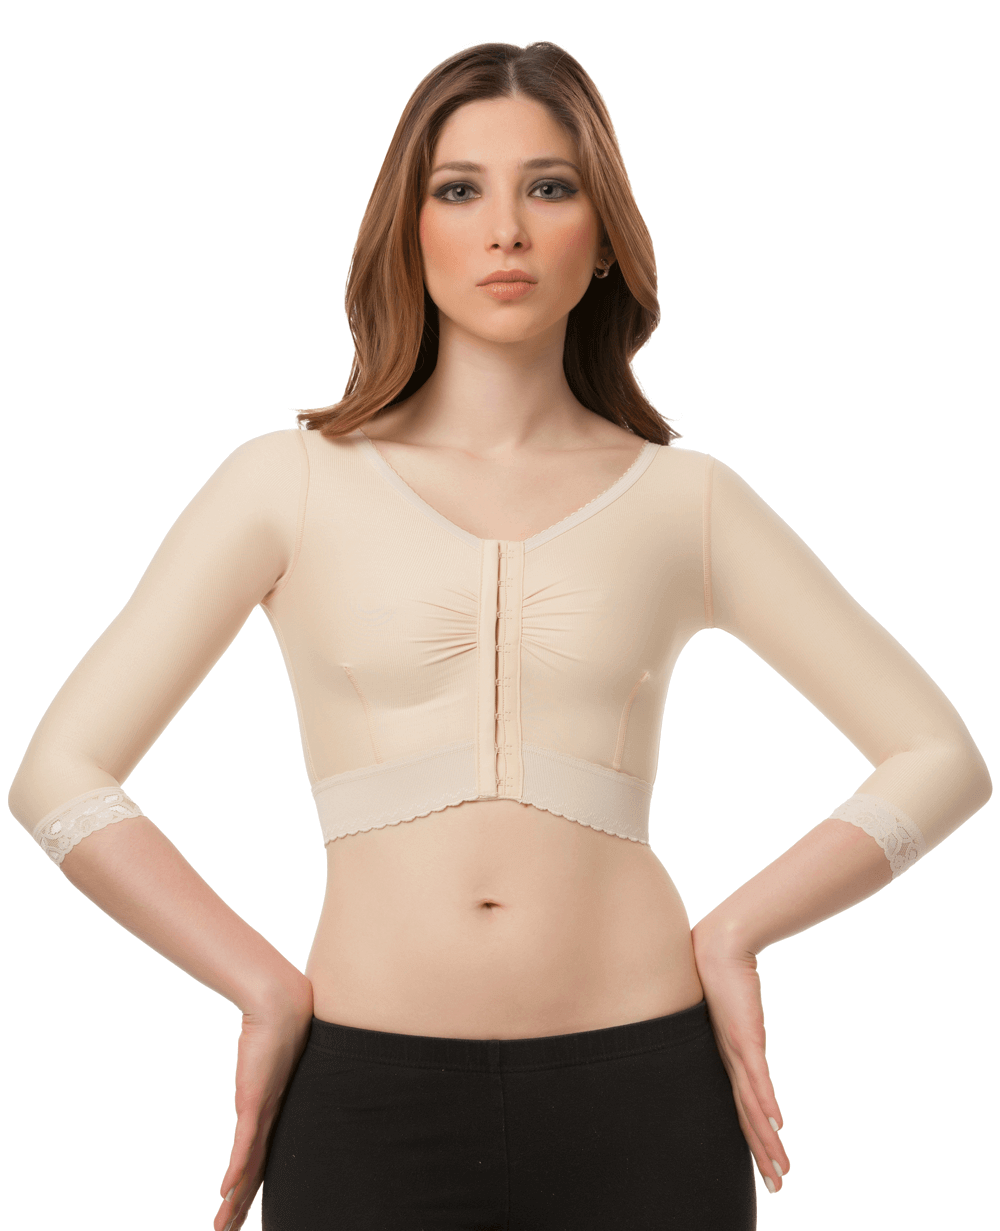  Isavela Low Waist Abdominal Above Knee Compression Girdle  W/Zipper on Both sides (GR11) (XS, Beige) : Clothing, Shoes & Jewelry